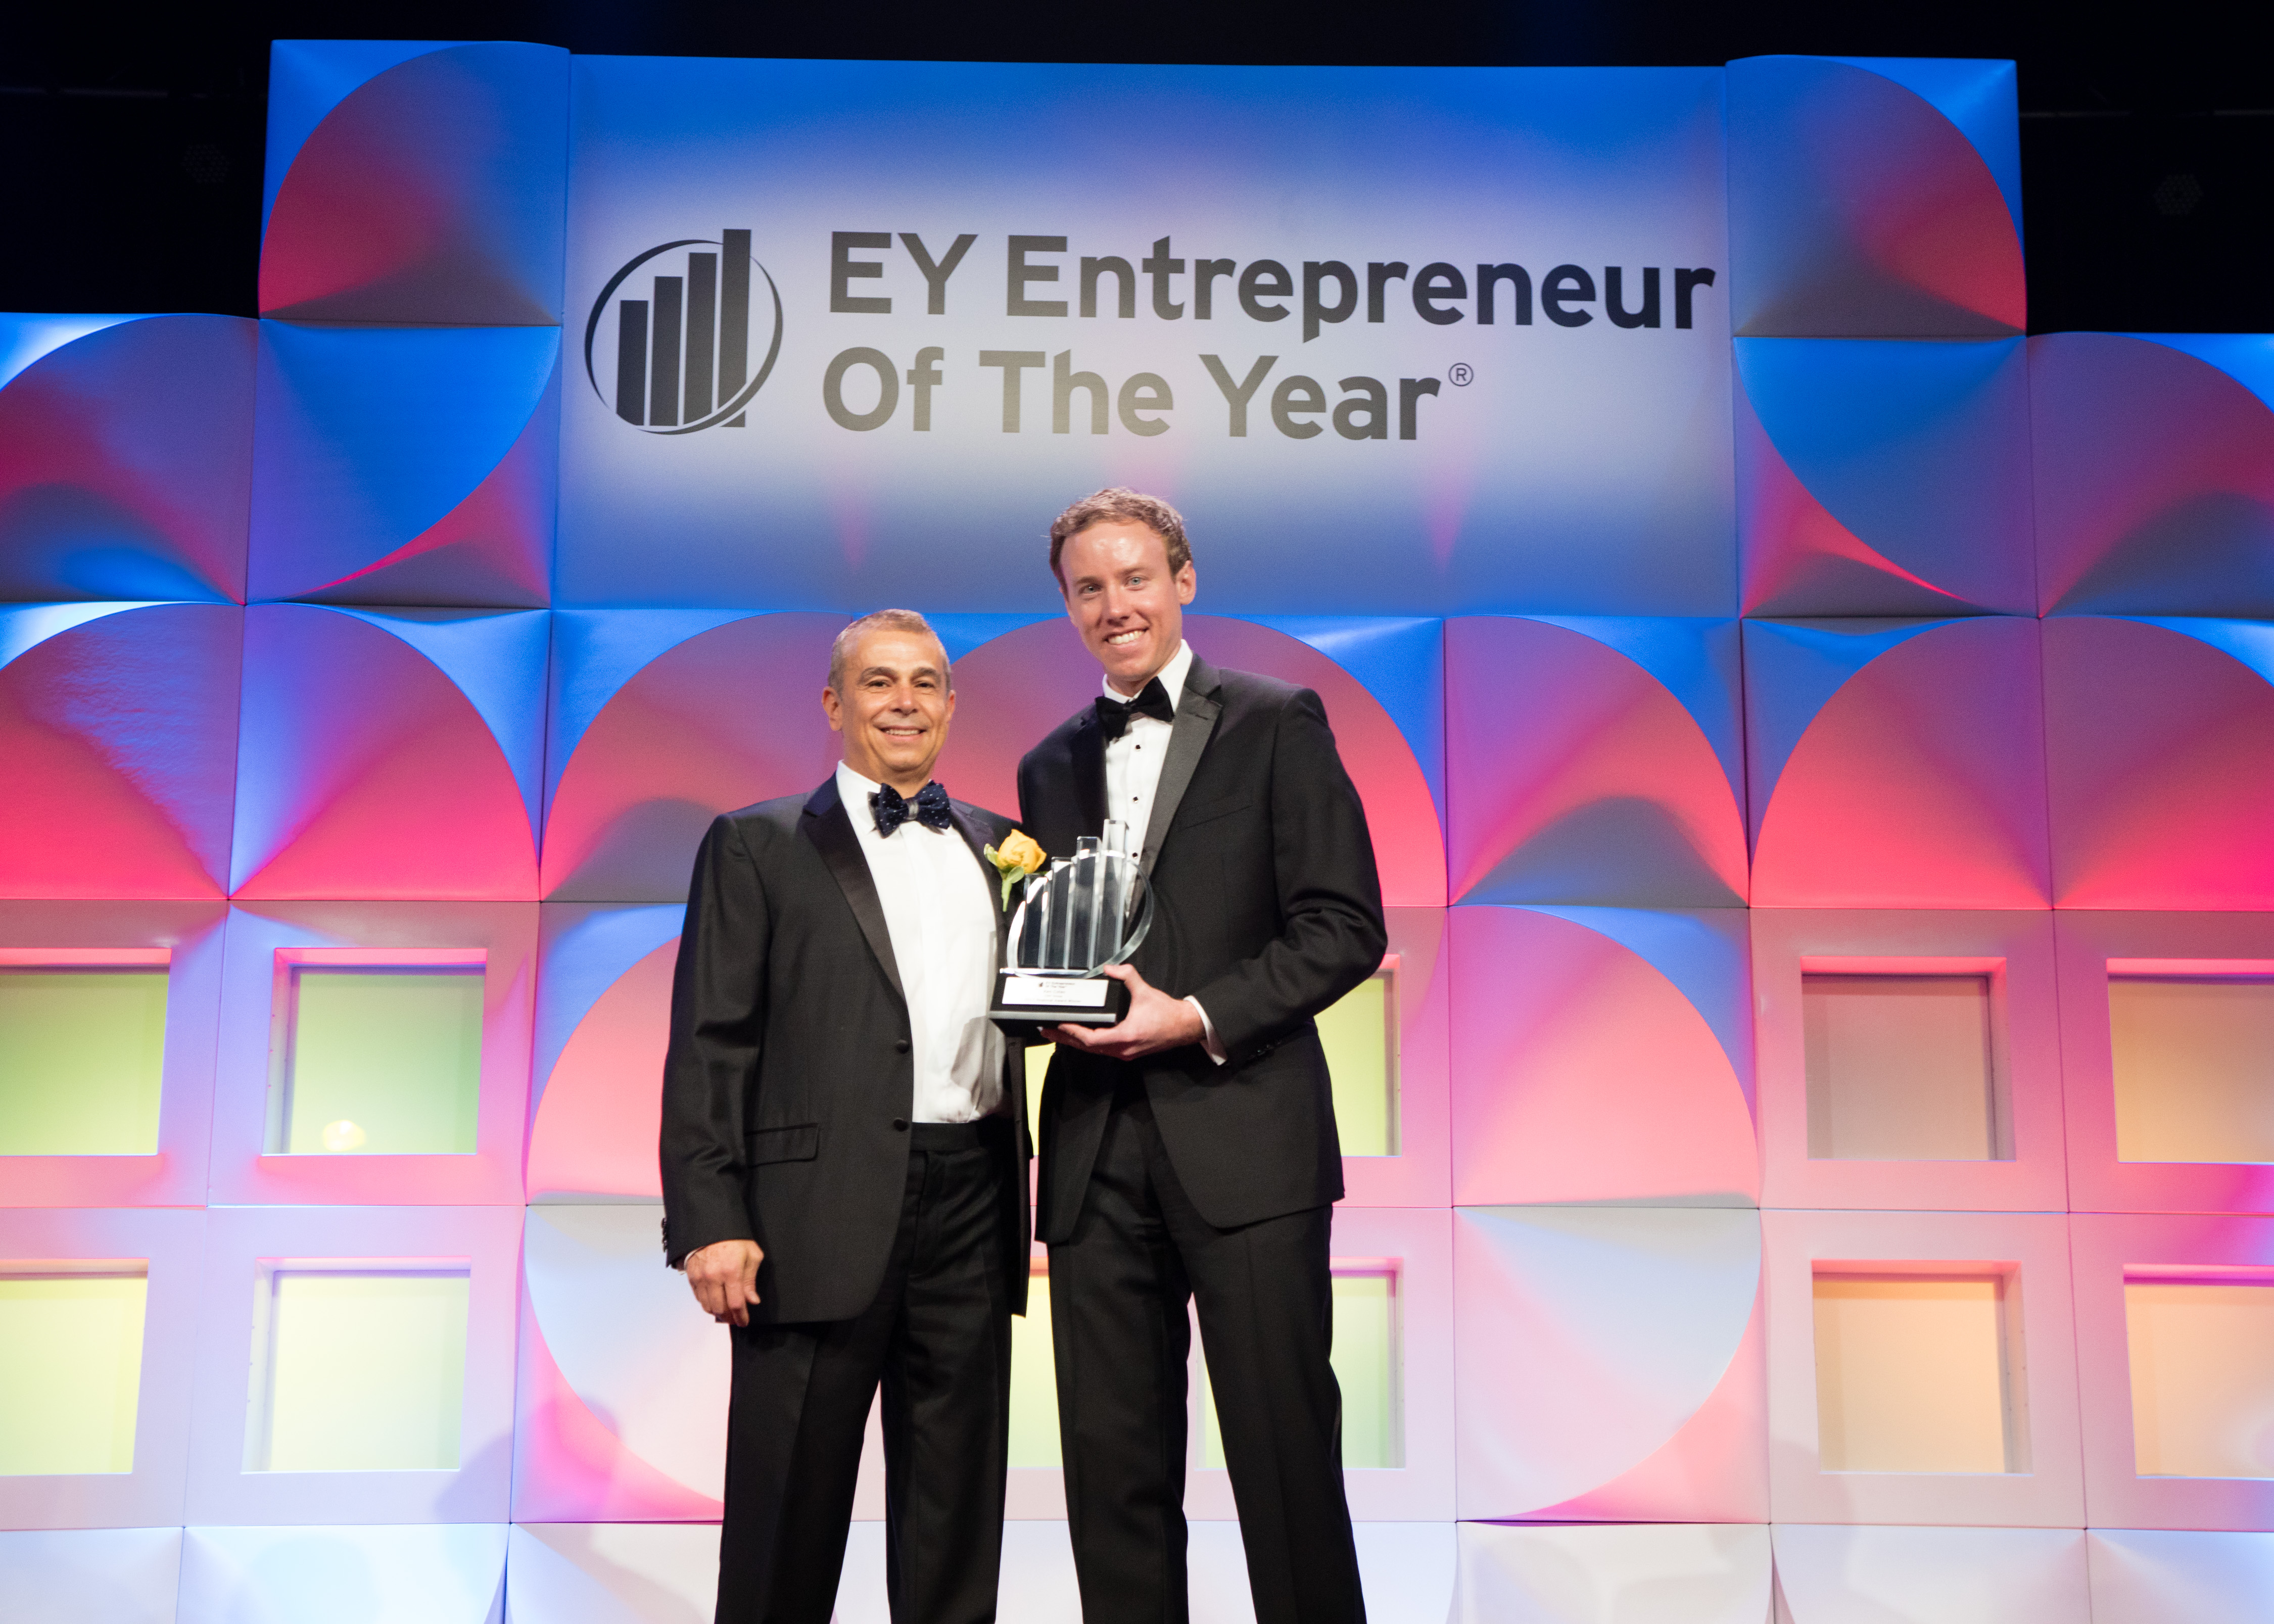 Ken Colao, President And Co-Founder CNY Group, Named EY’s “Entrepreneur Of The Year 2017” For New York